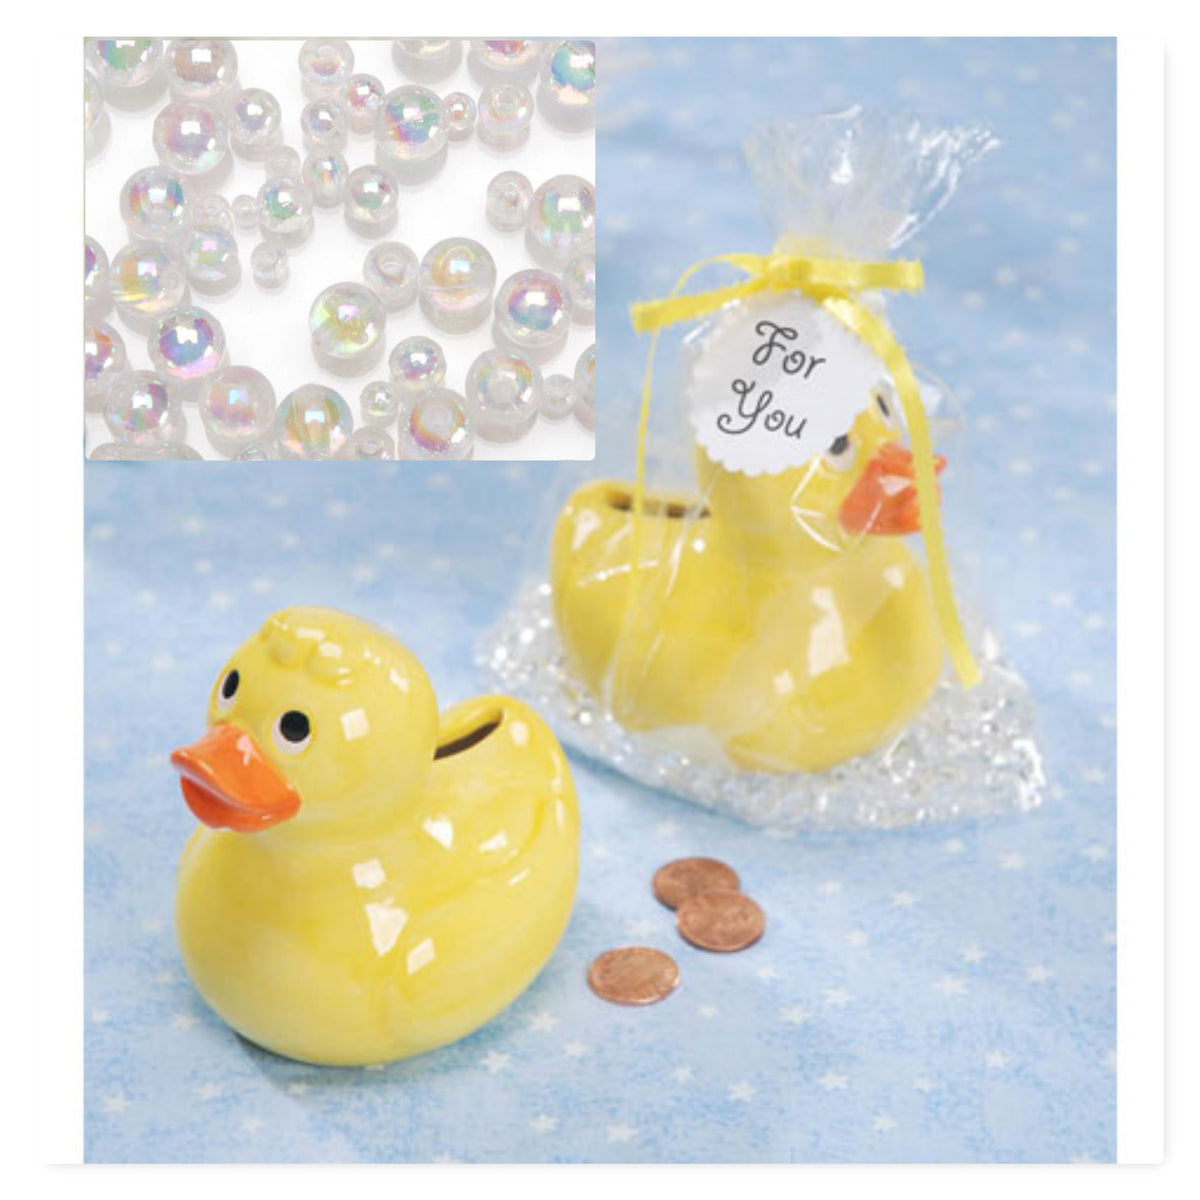 *Clearance* 2 Ceramic Duck Banks - Baby Shower Decorations and Party Favors